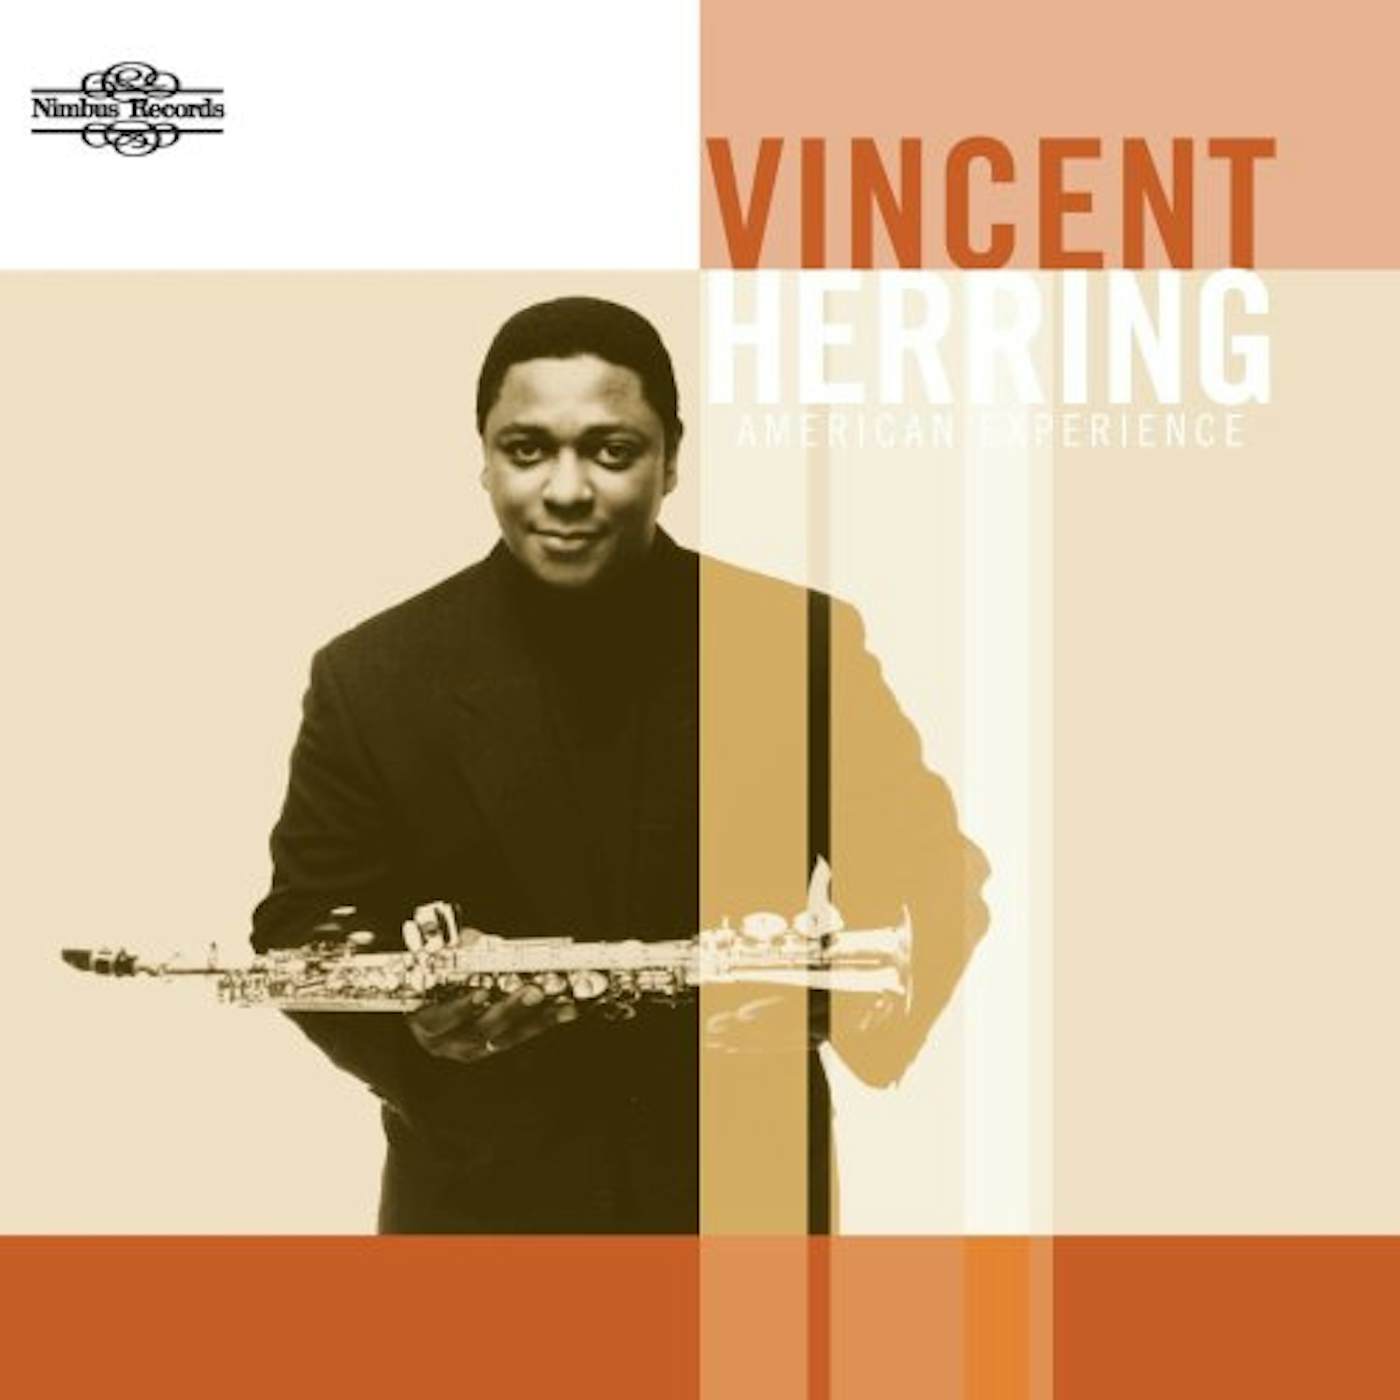 Vincent Herring AMERICAN EXPERIENCE CD